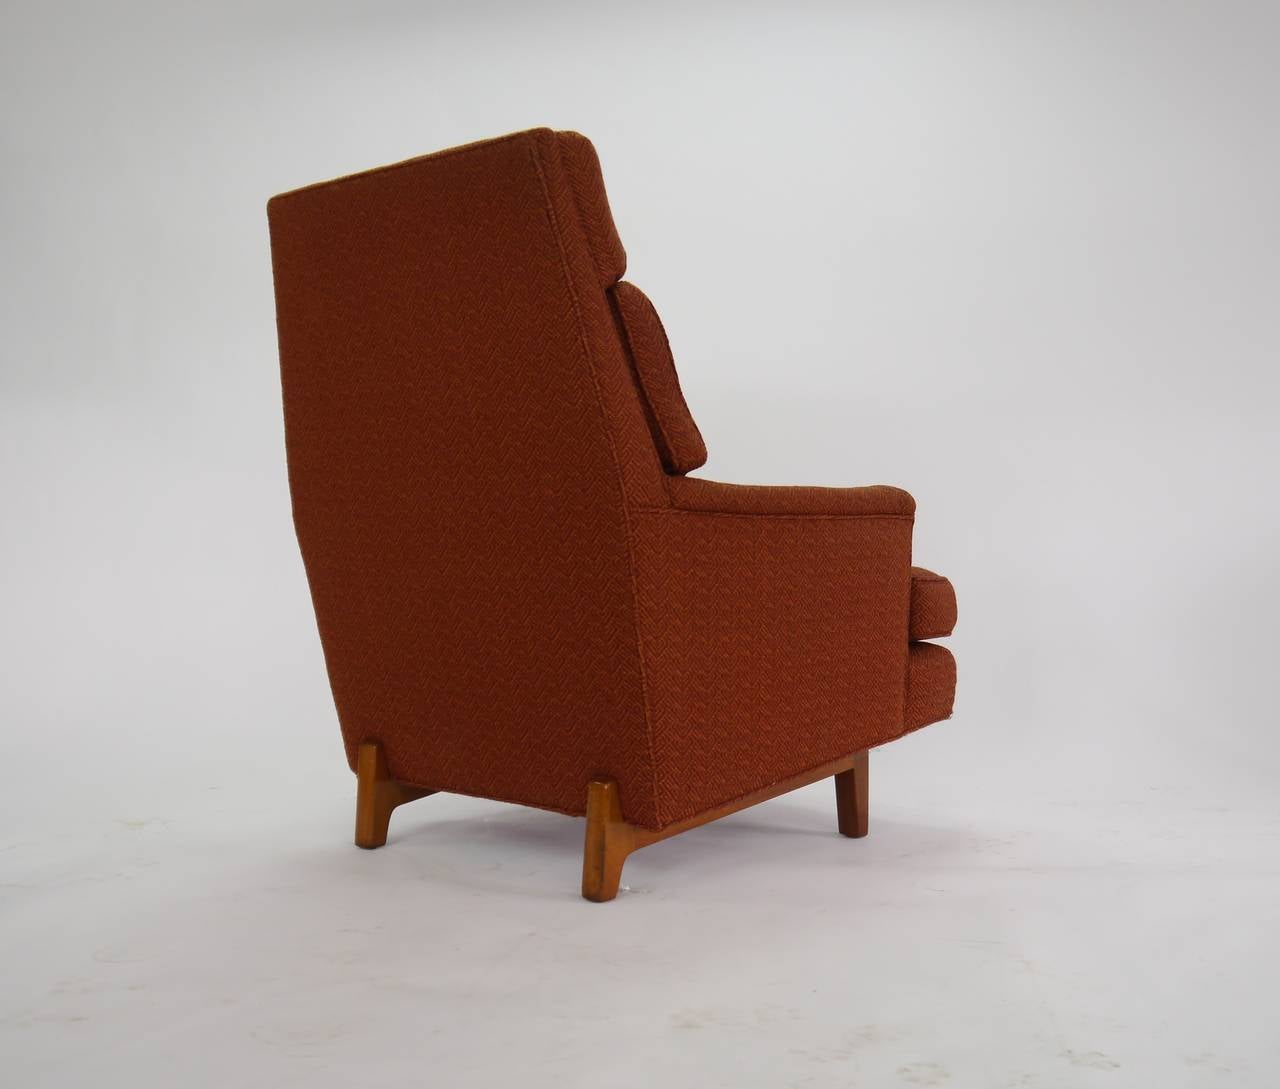 Mid-20th Century Lounge Chair and Ottoman by Edward Wormley for Dunbar For Sale